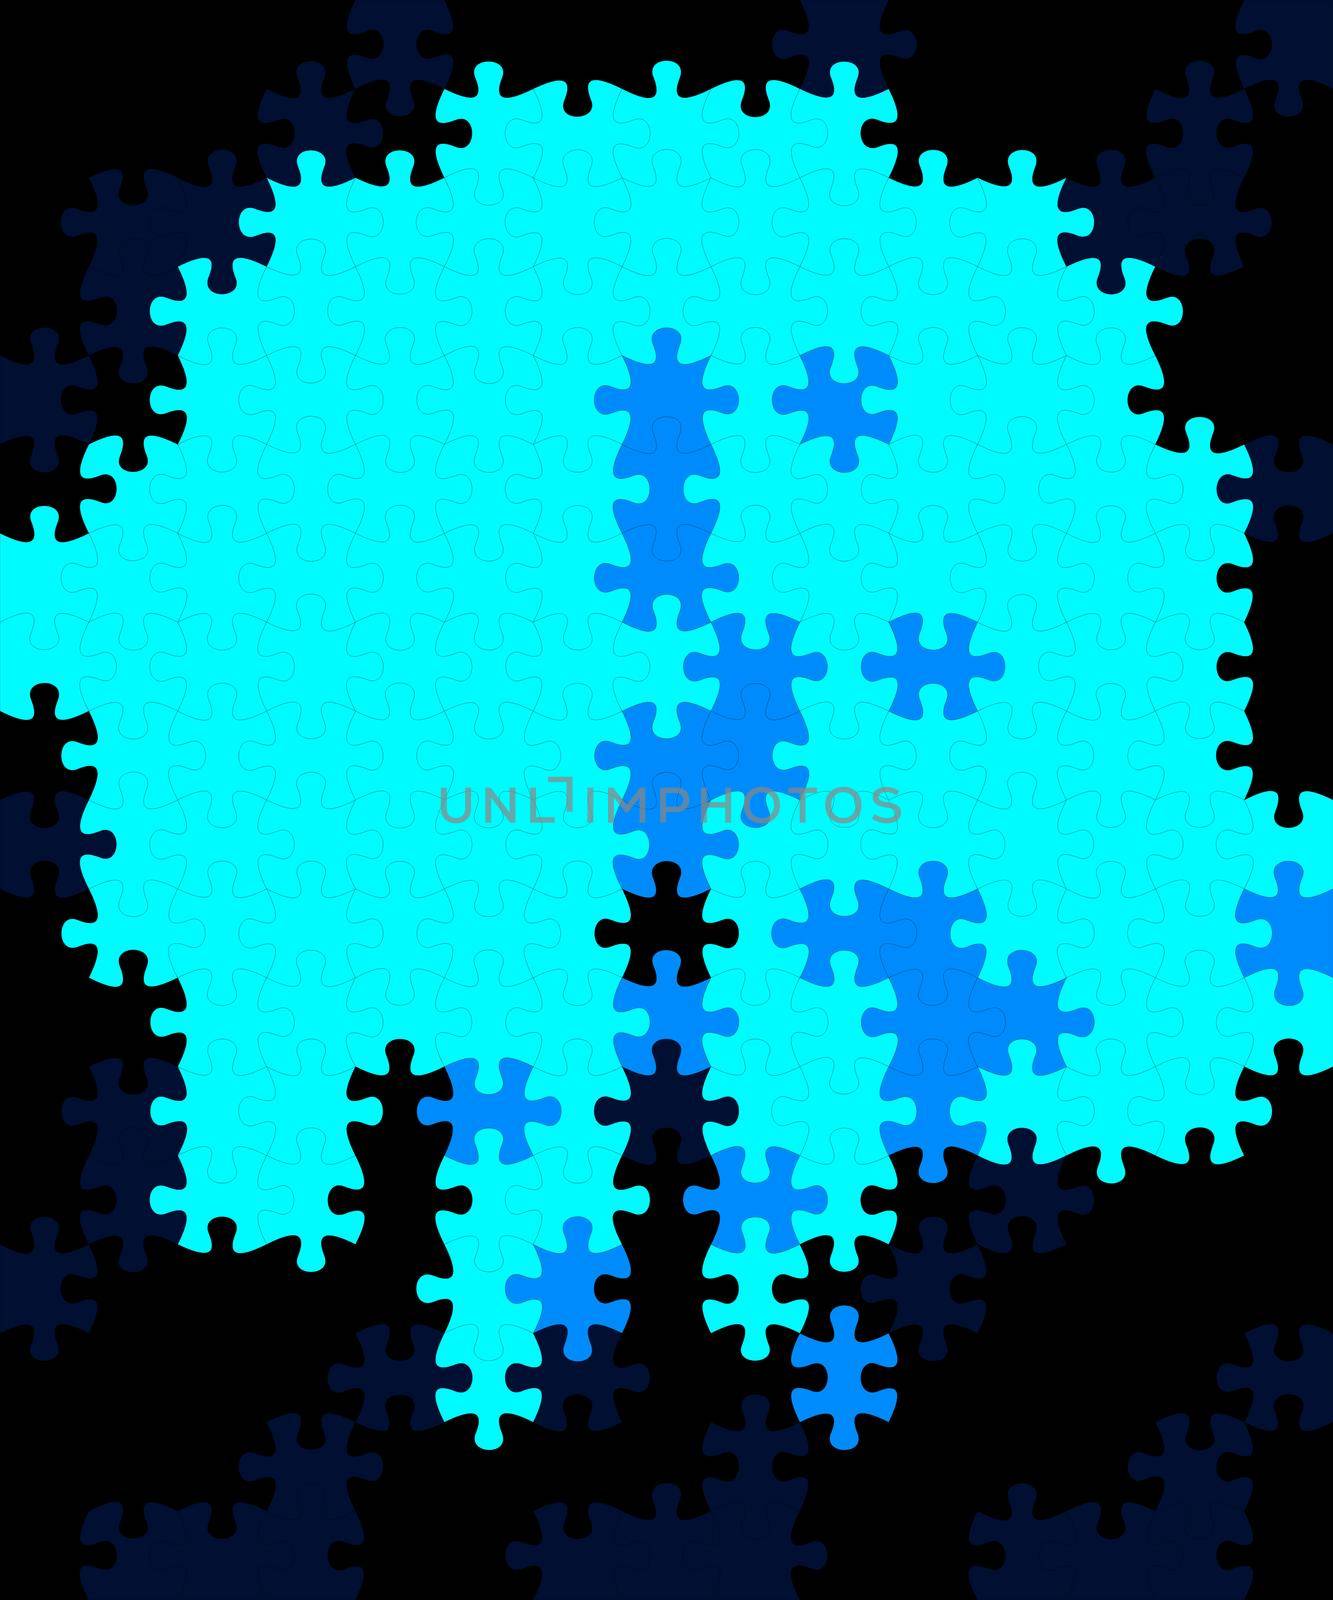 Connected blank puzzle pieces using 4 colors, digitally created